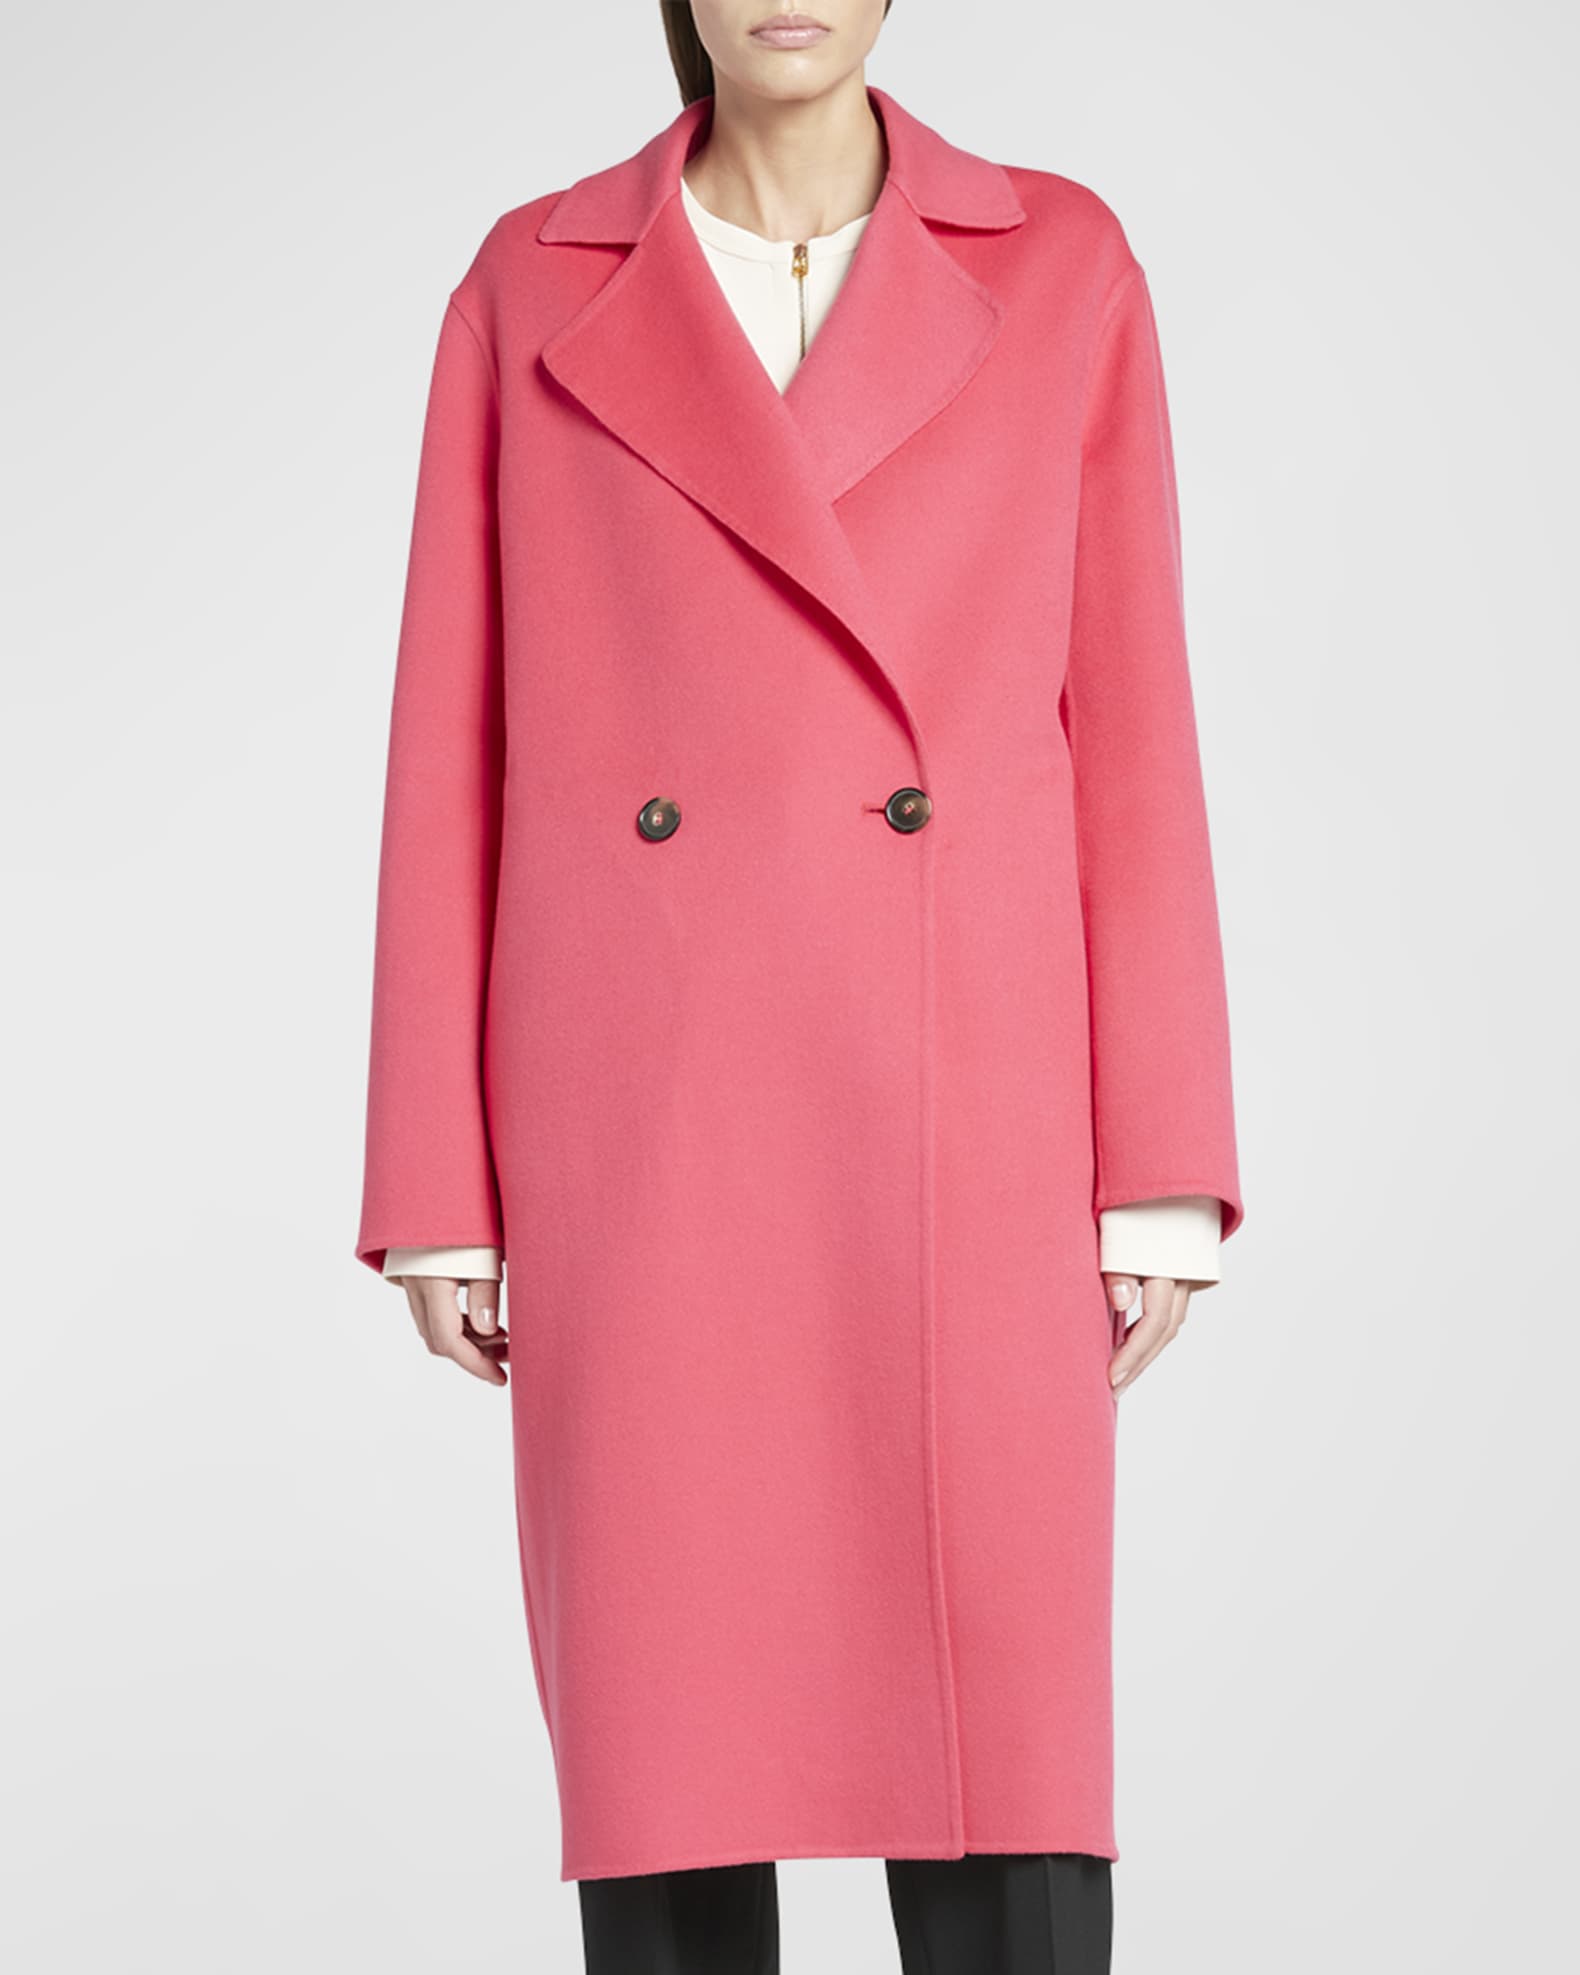 Stella McCartney Iconic Double-Breasted Wool Peacoat | Neiman Marcus